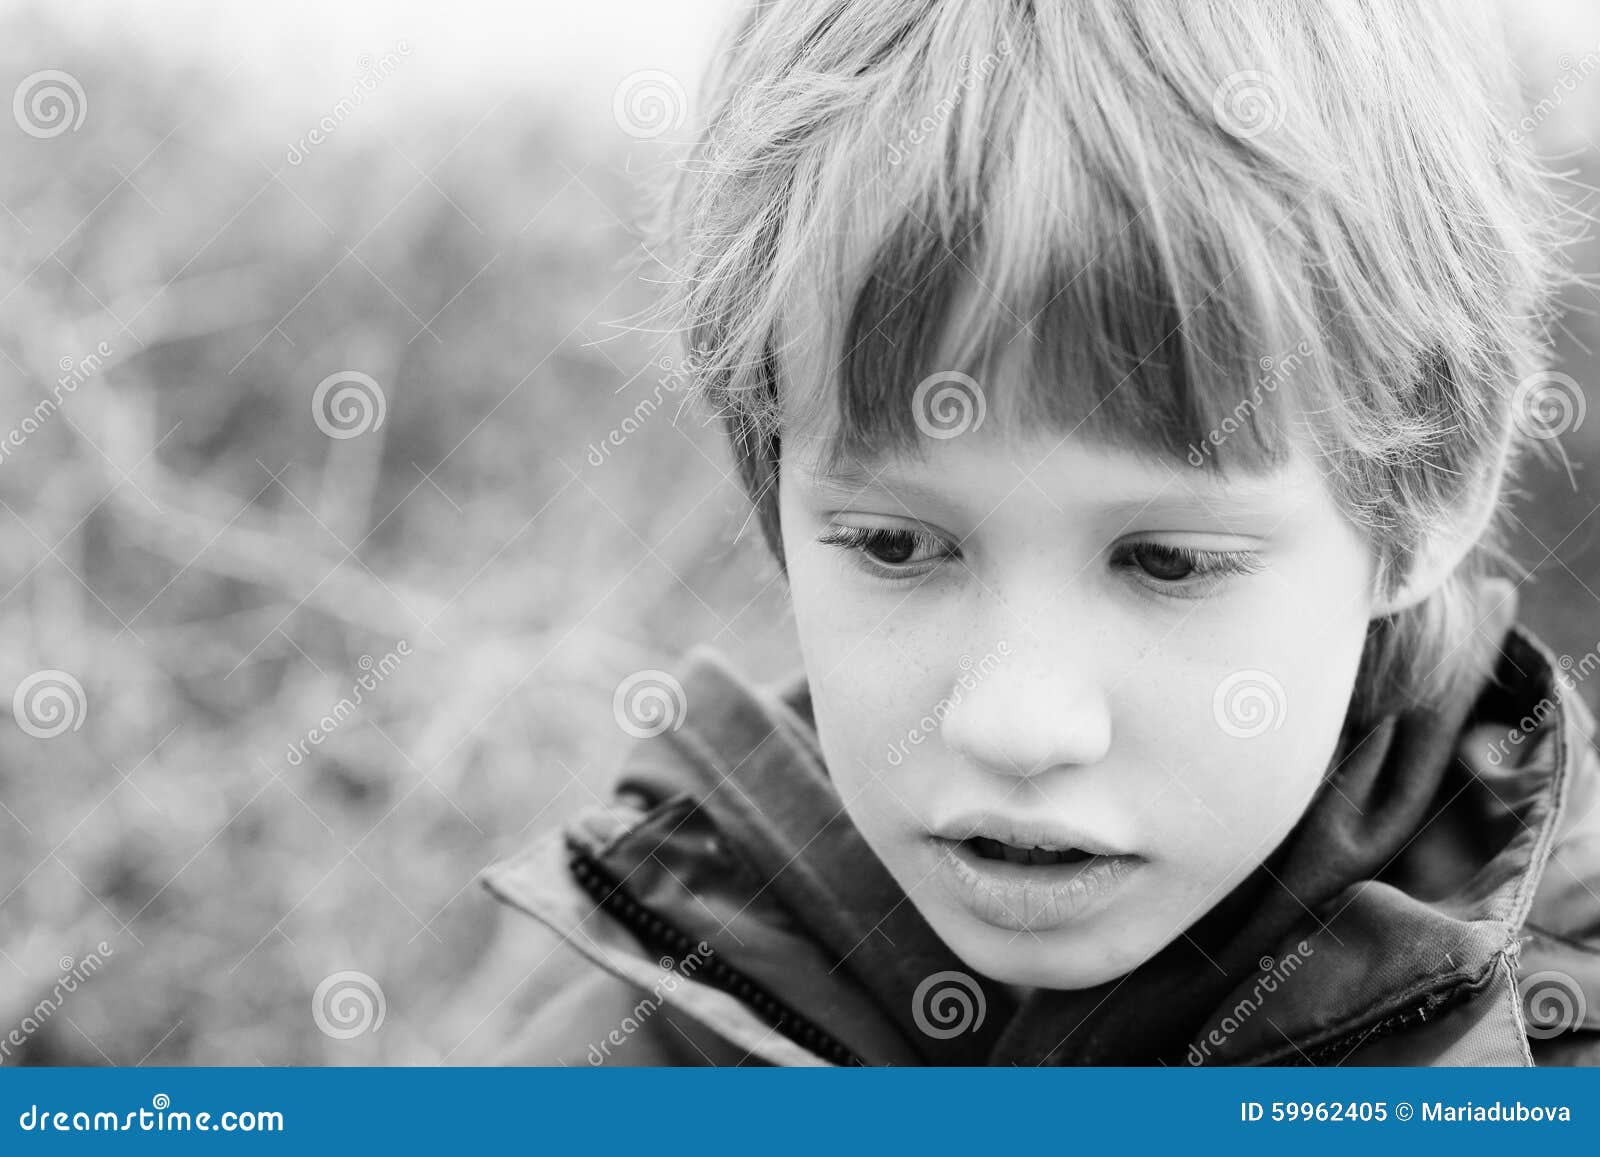 Portrait of 6 Years Old Boy Stock Image - Image of cute, holiday: 59962405